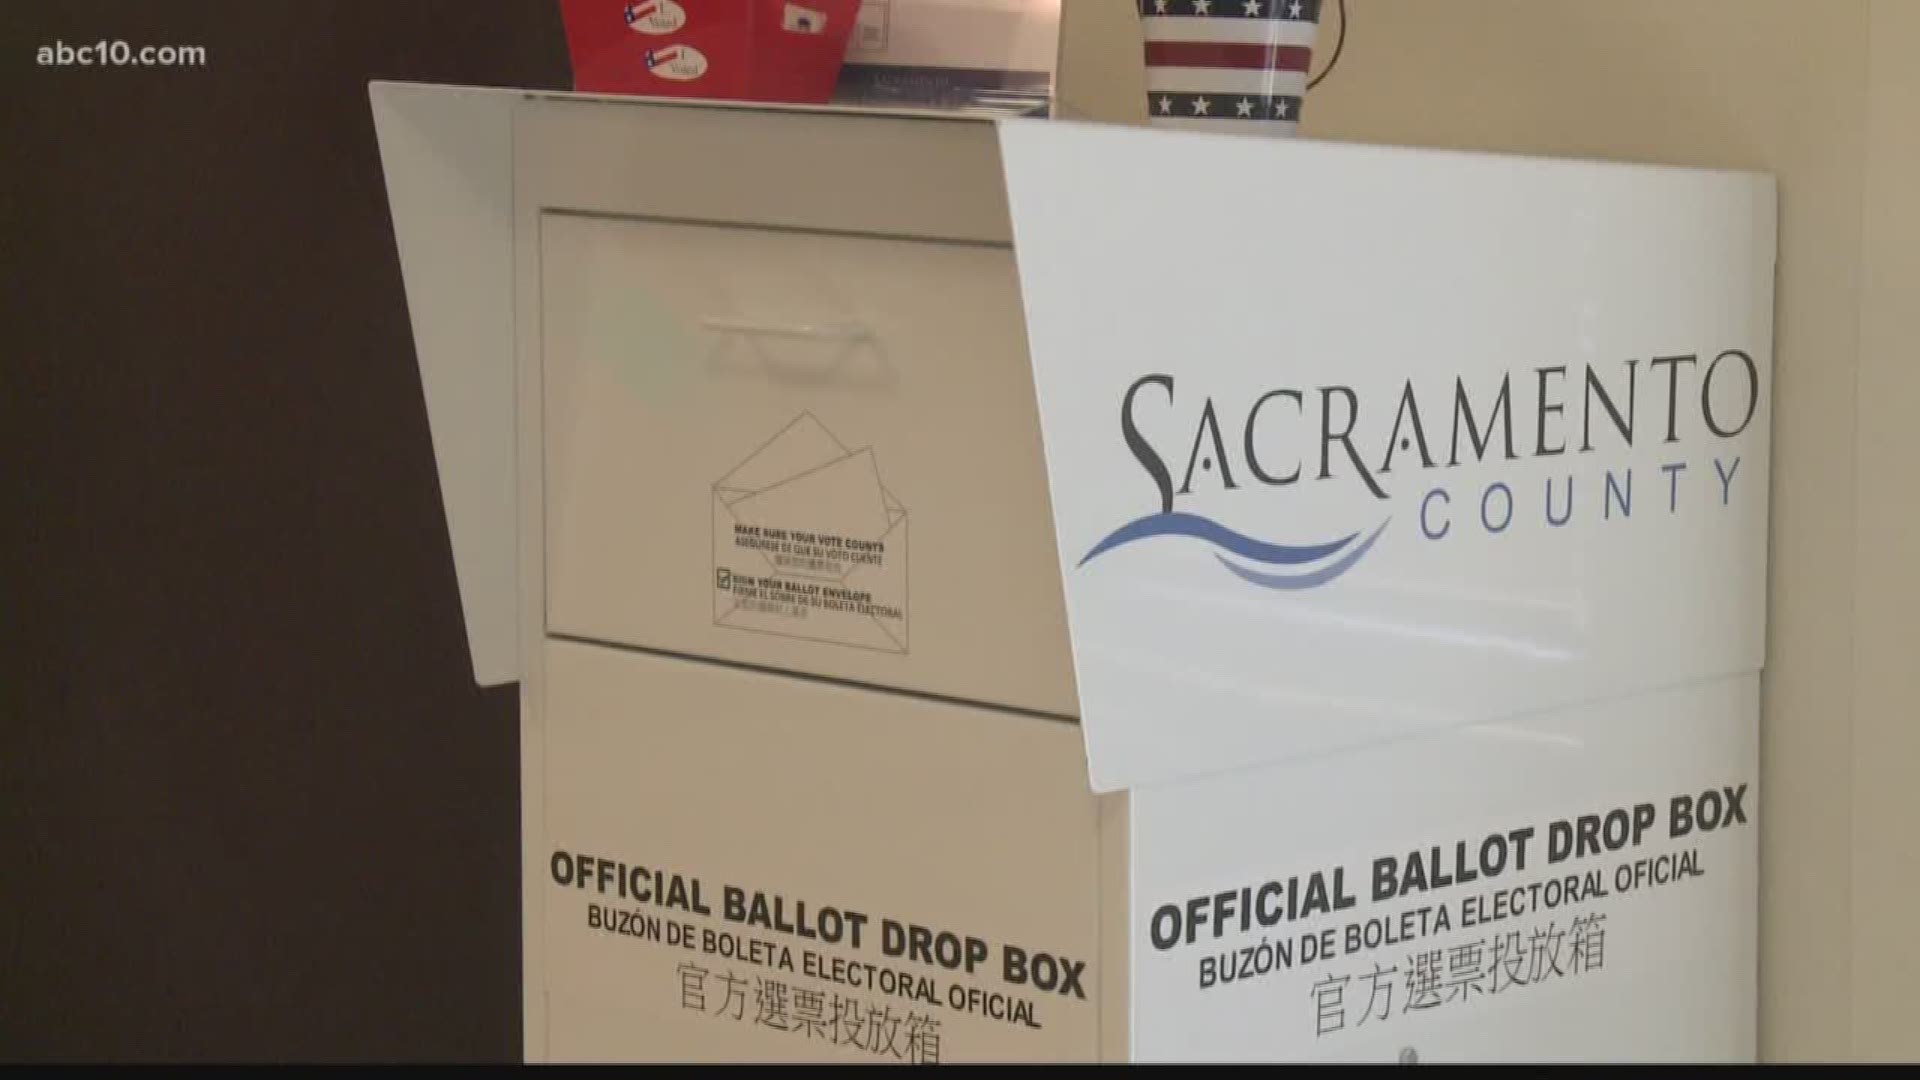 There are five counties in California that are using "vote by mail" or "drop-off" only this upcoming election, and Sacramento County is one of them.